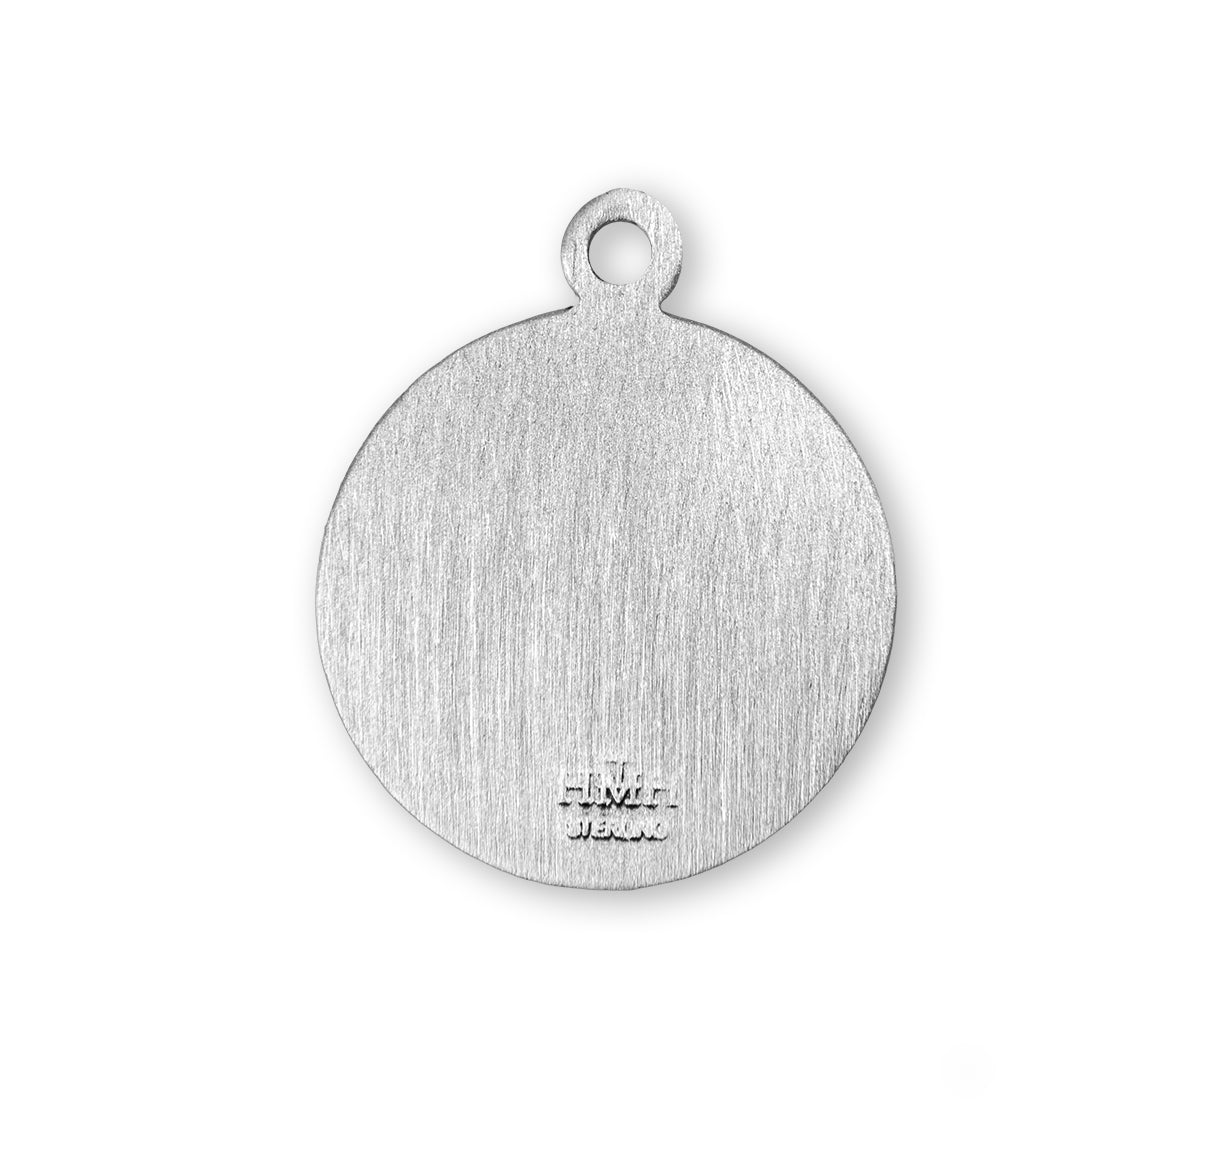 Saint Maria Faustina Round Sterling Silver Medal